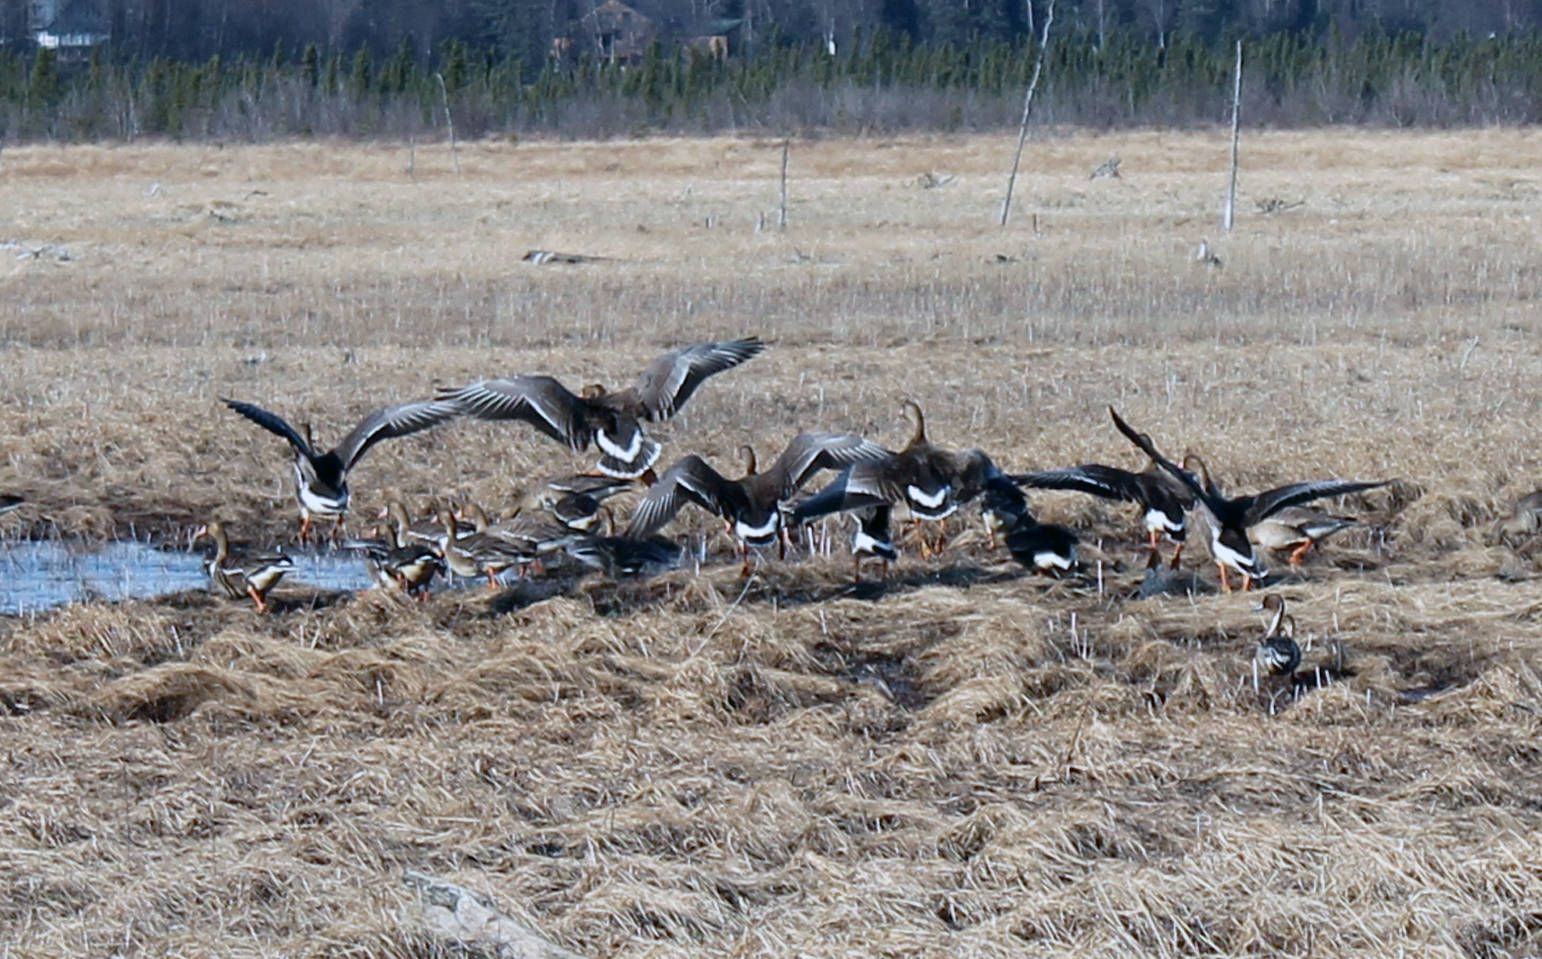 A gaggle of greater white-fronted geese, along with a few northern pintail ducks, forage on the Kenai River flats near Bridge Access Road on Tuesday morning. The flats provide an important layover area for birds migrating north for the summer. (Photo by Will Morrow/Peninsula Clarion)